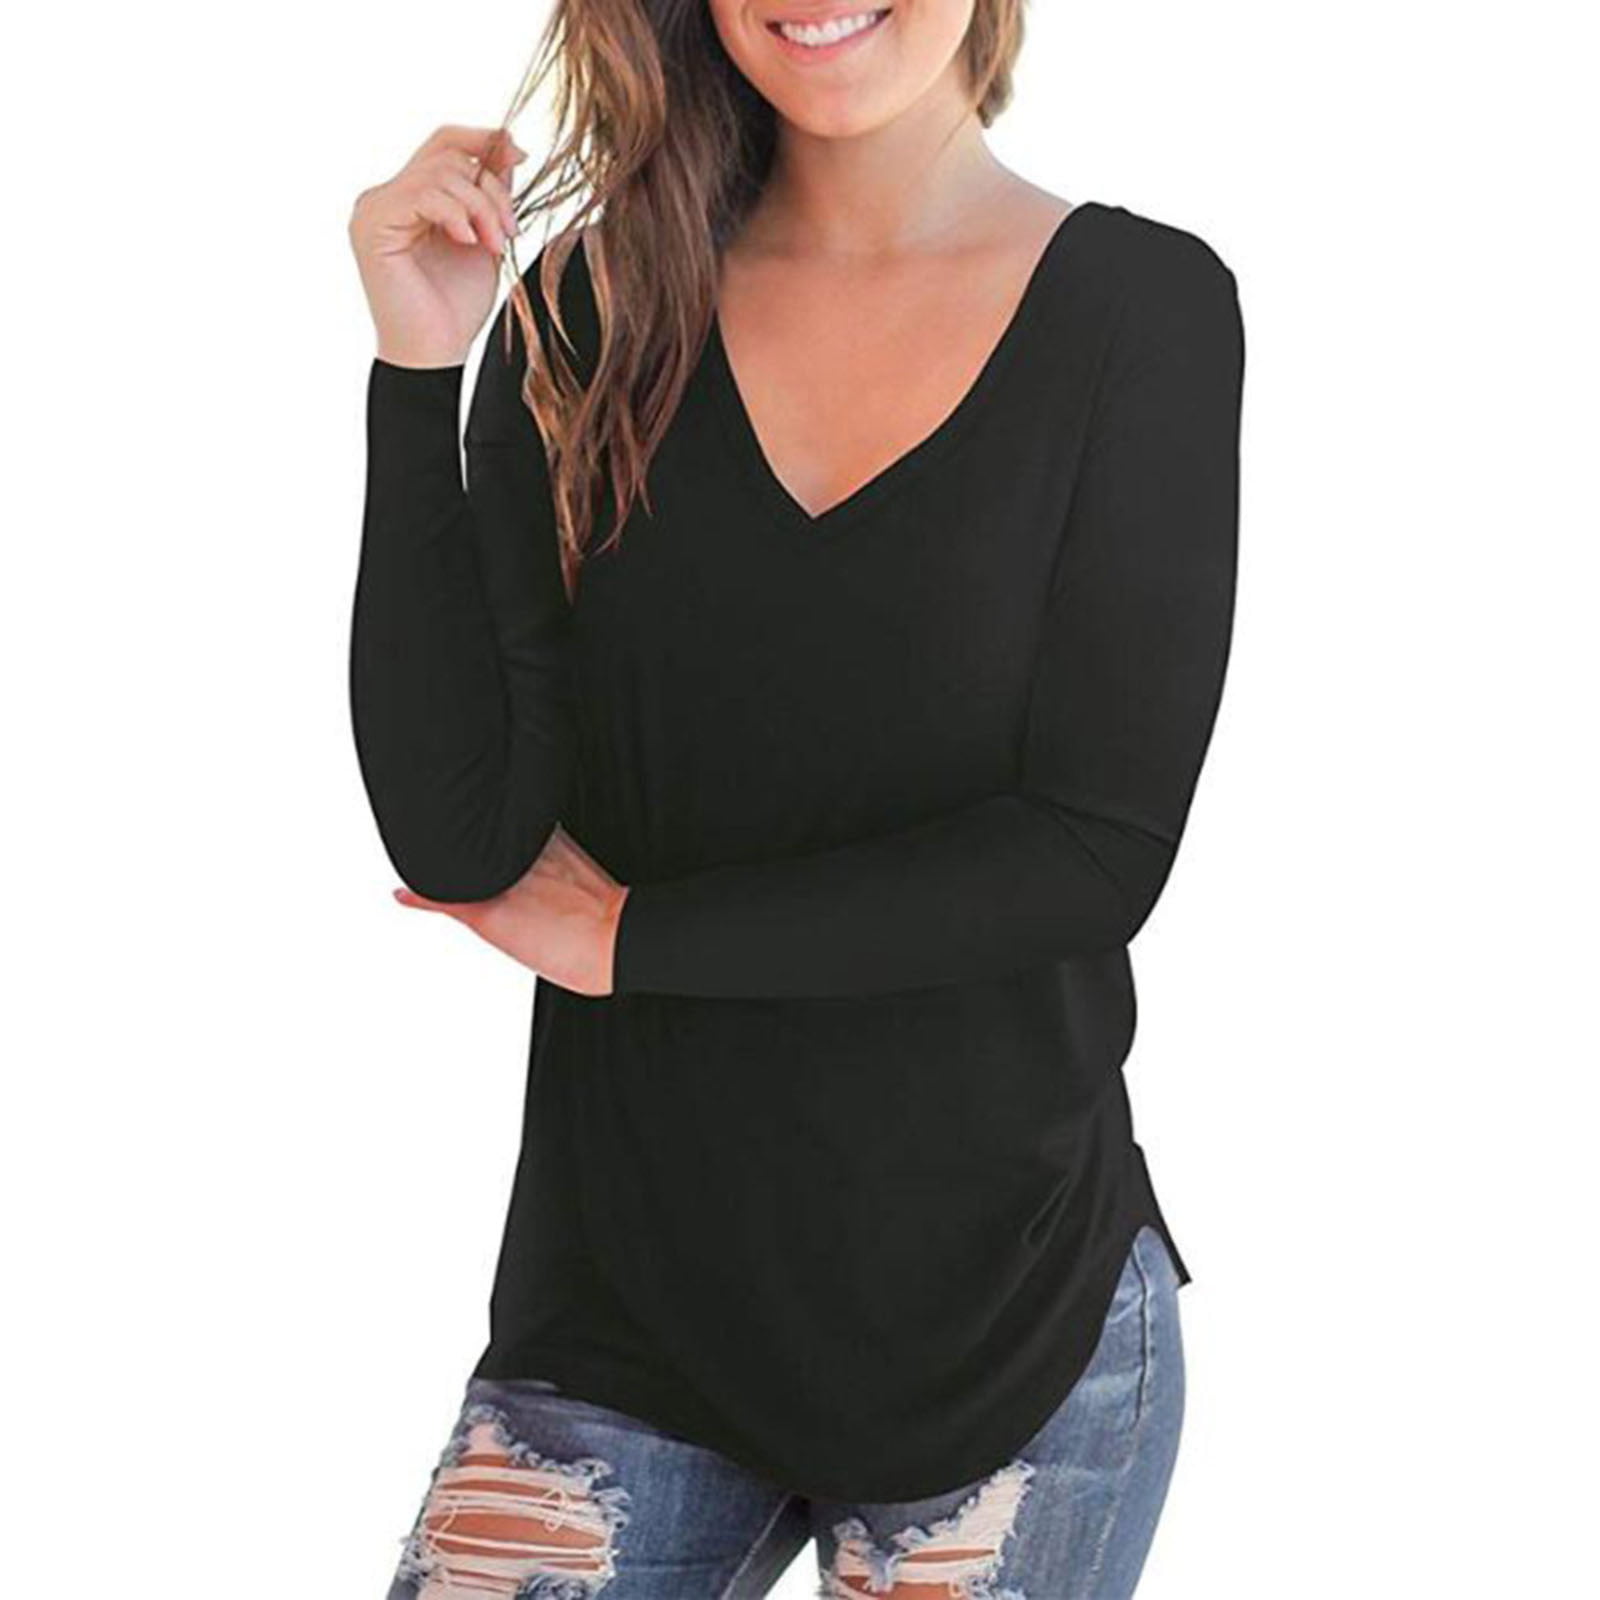 vbnergoie Womens Long Sleeve V Neck Solid Color Tops Loose Casual